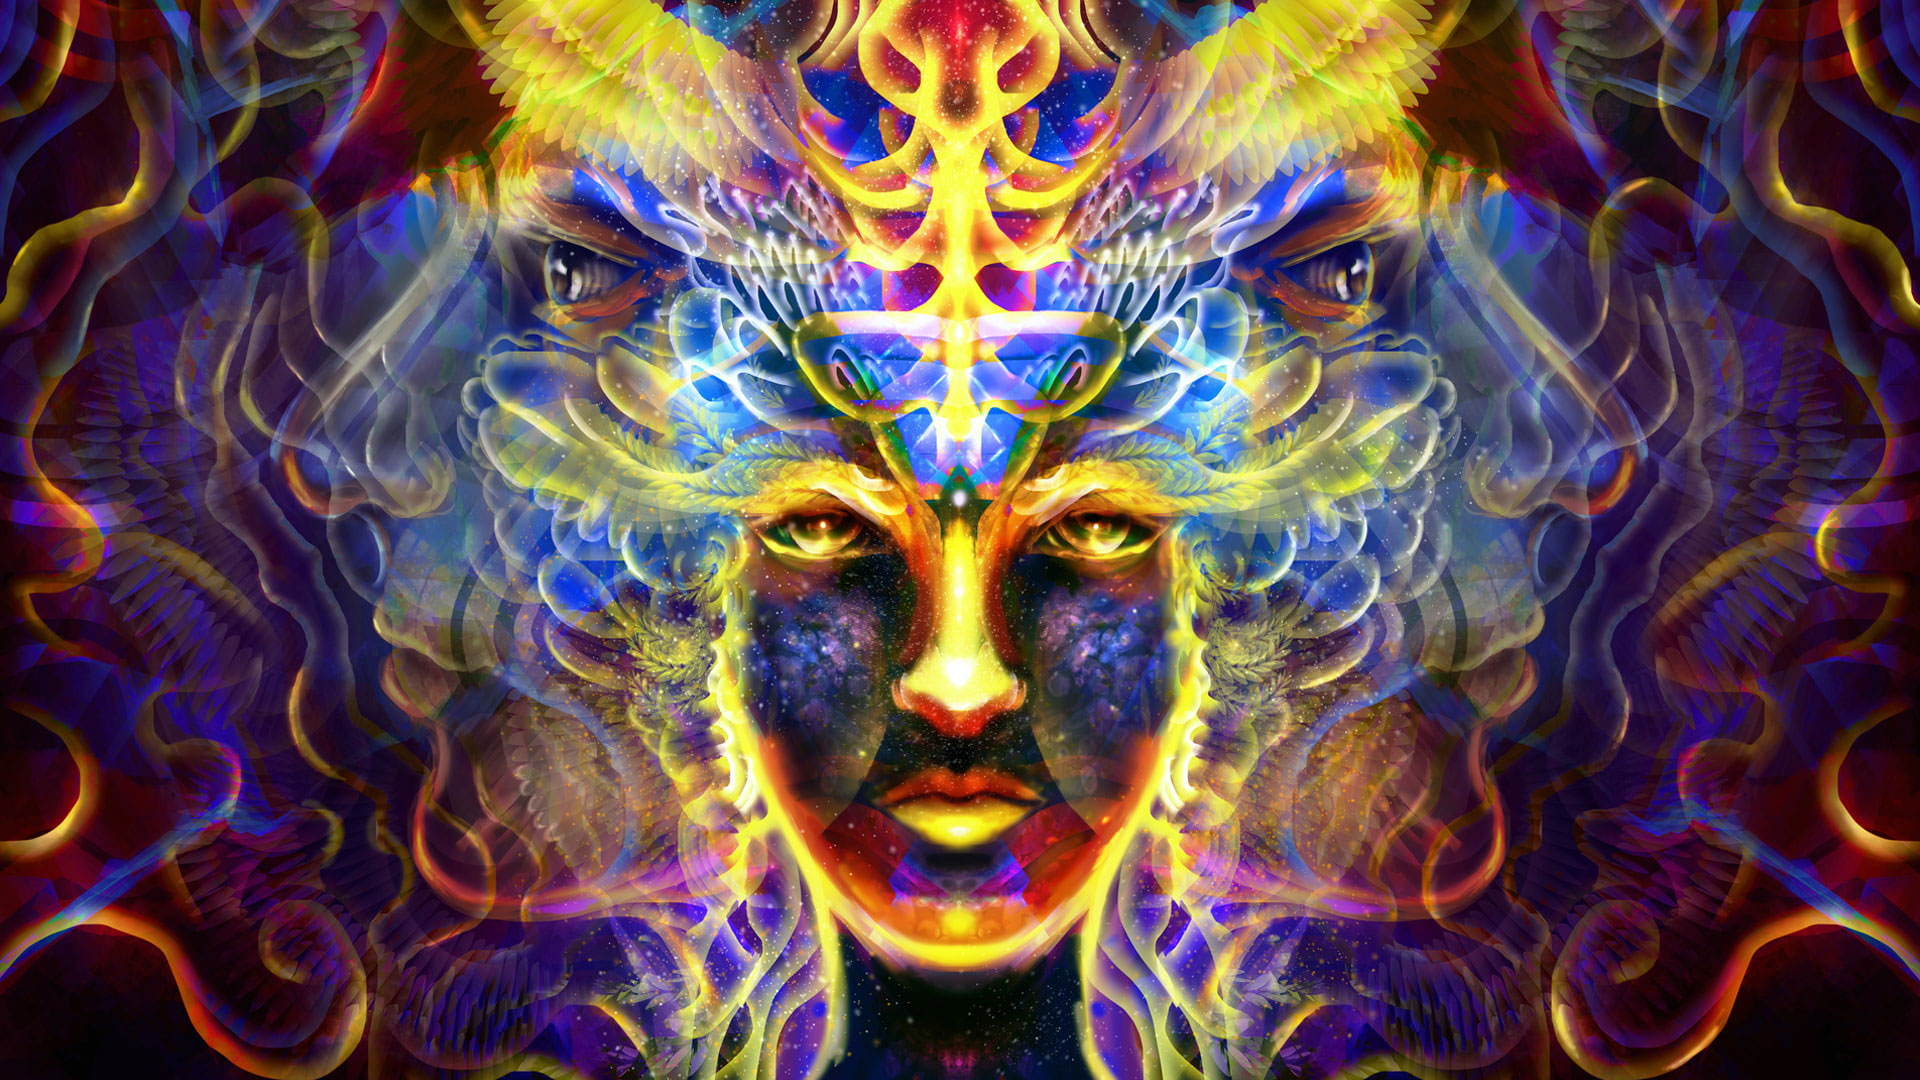 Trippy wallpaper, psychedelic, colorful, fractal, front view, portrait